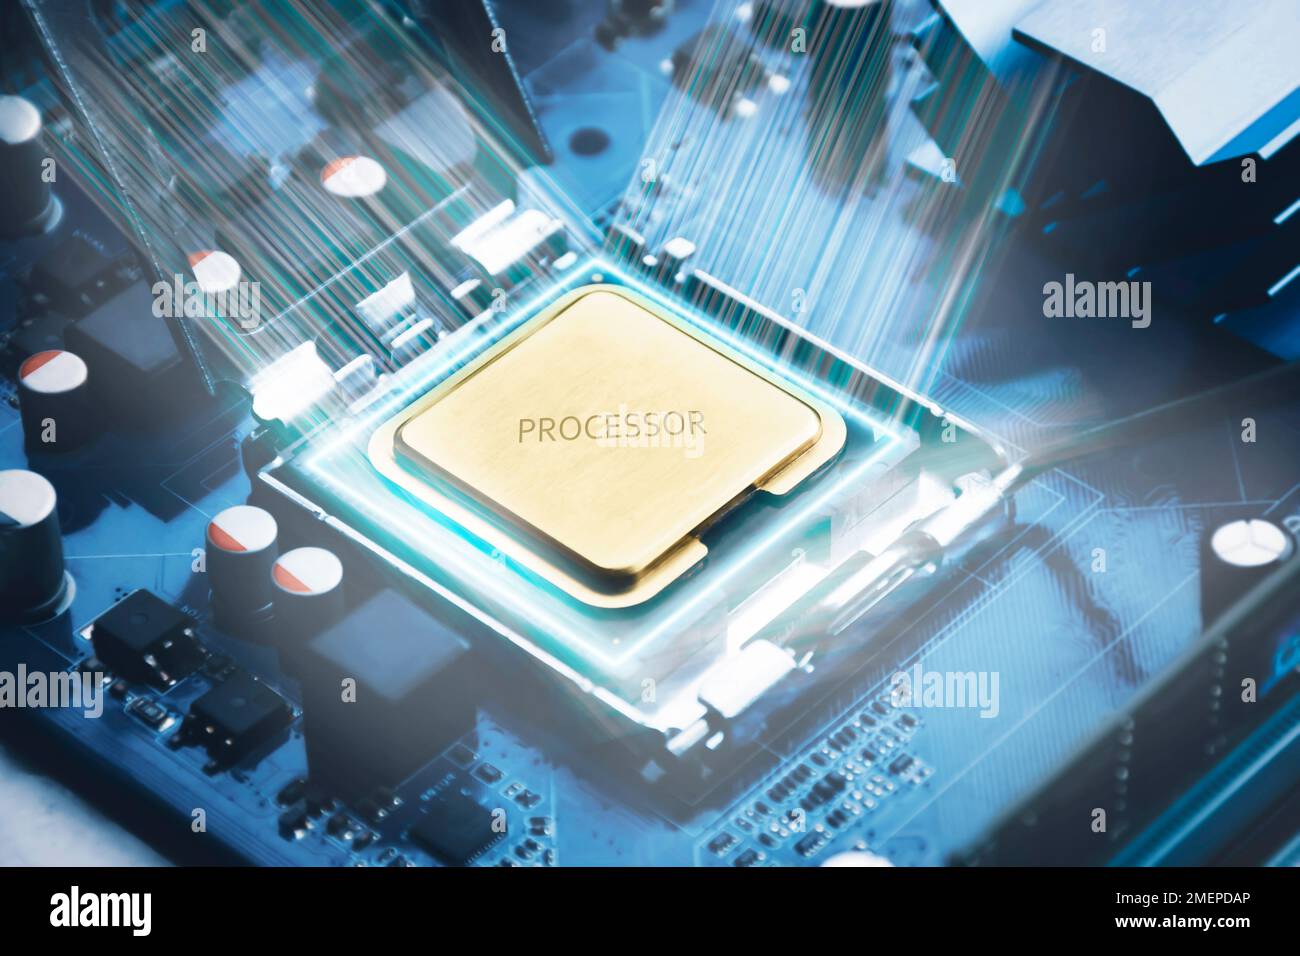 Golden CPU chip in a slot on a computer motherboard and glowing light around the processor chip, computer technology parts concept Stock Photo